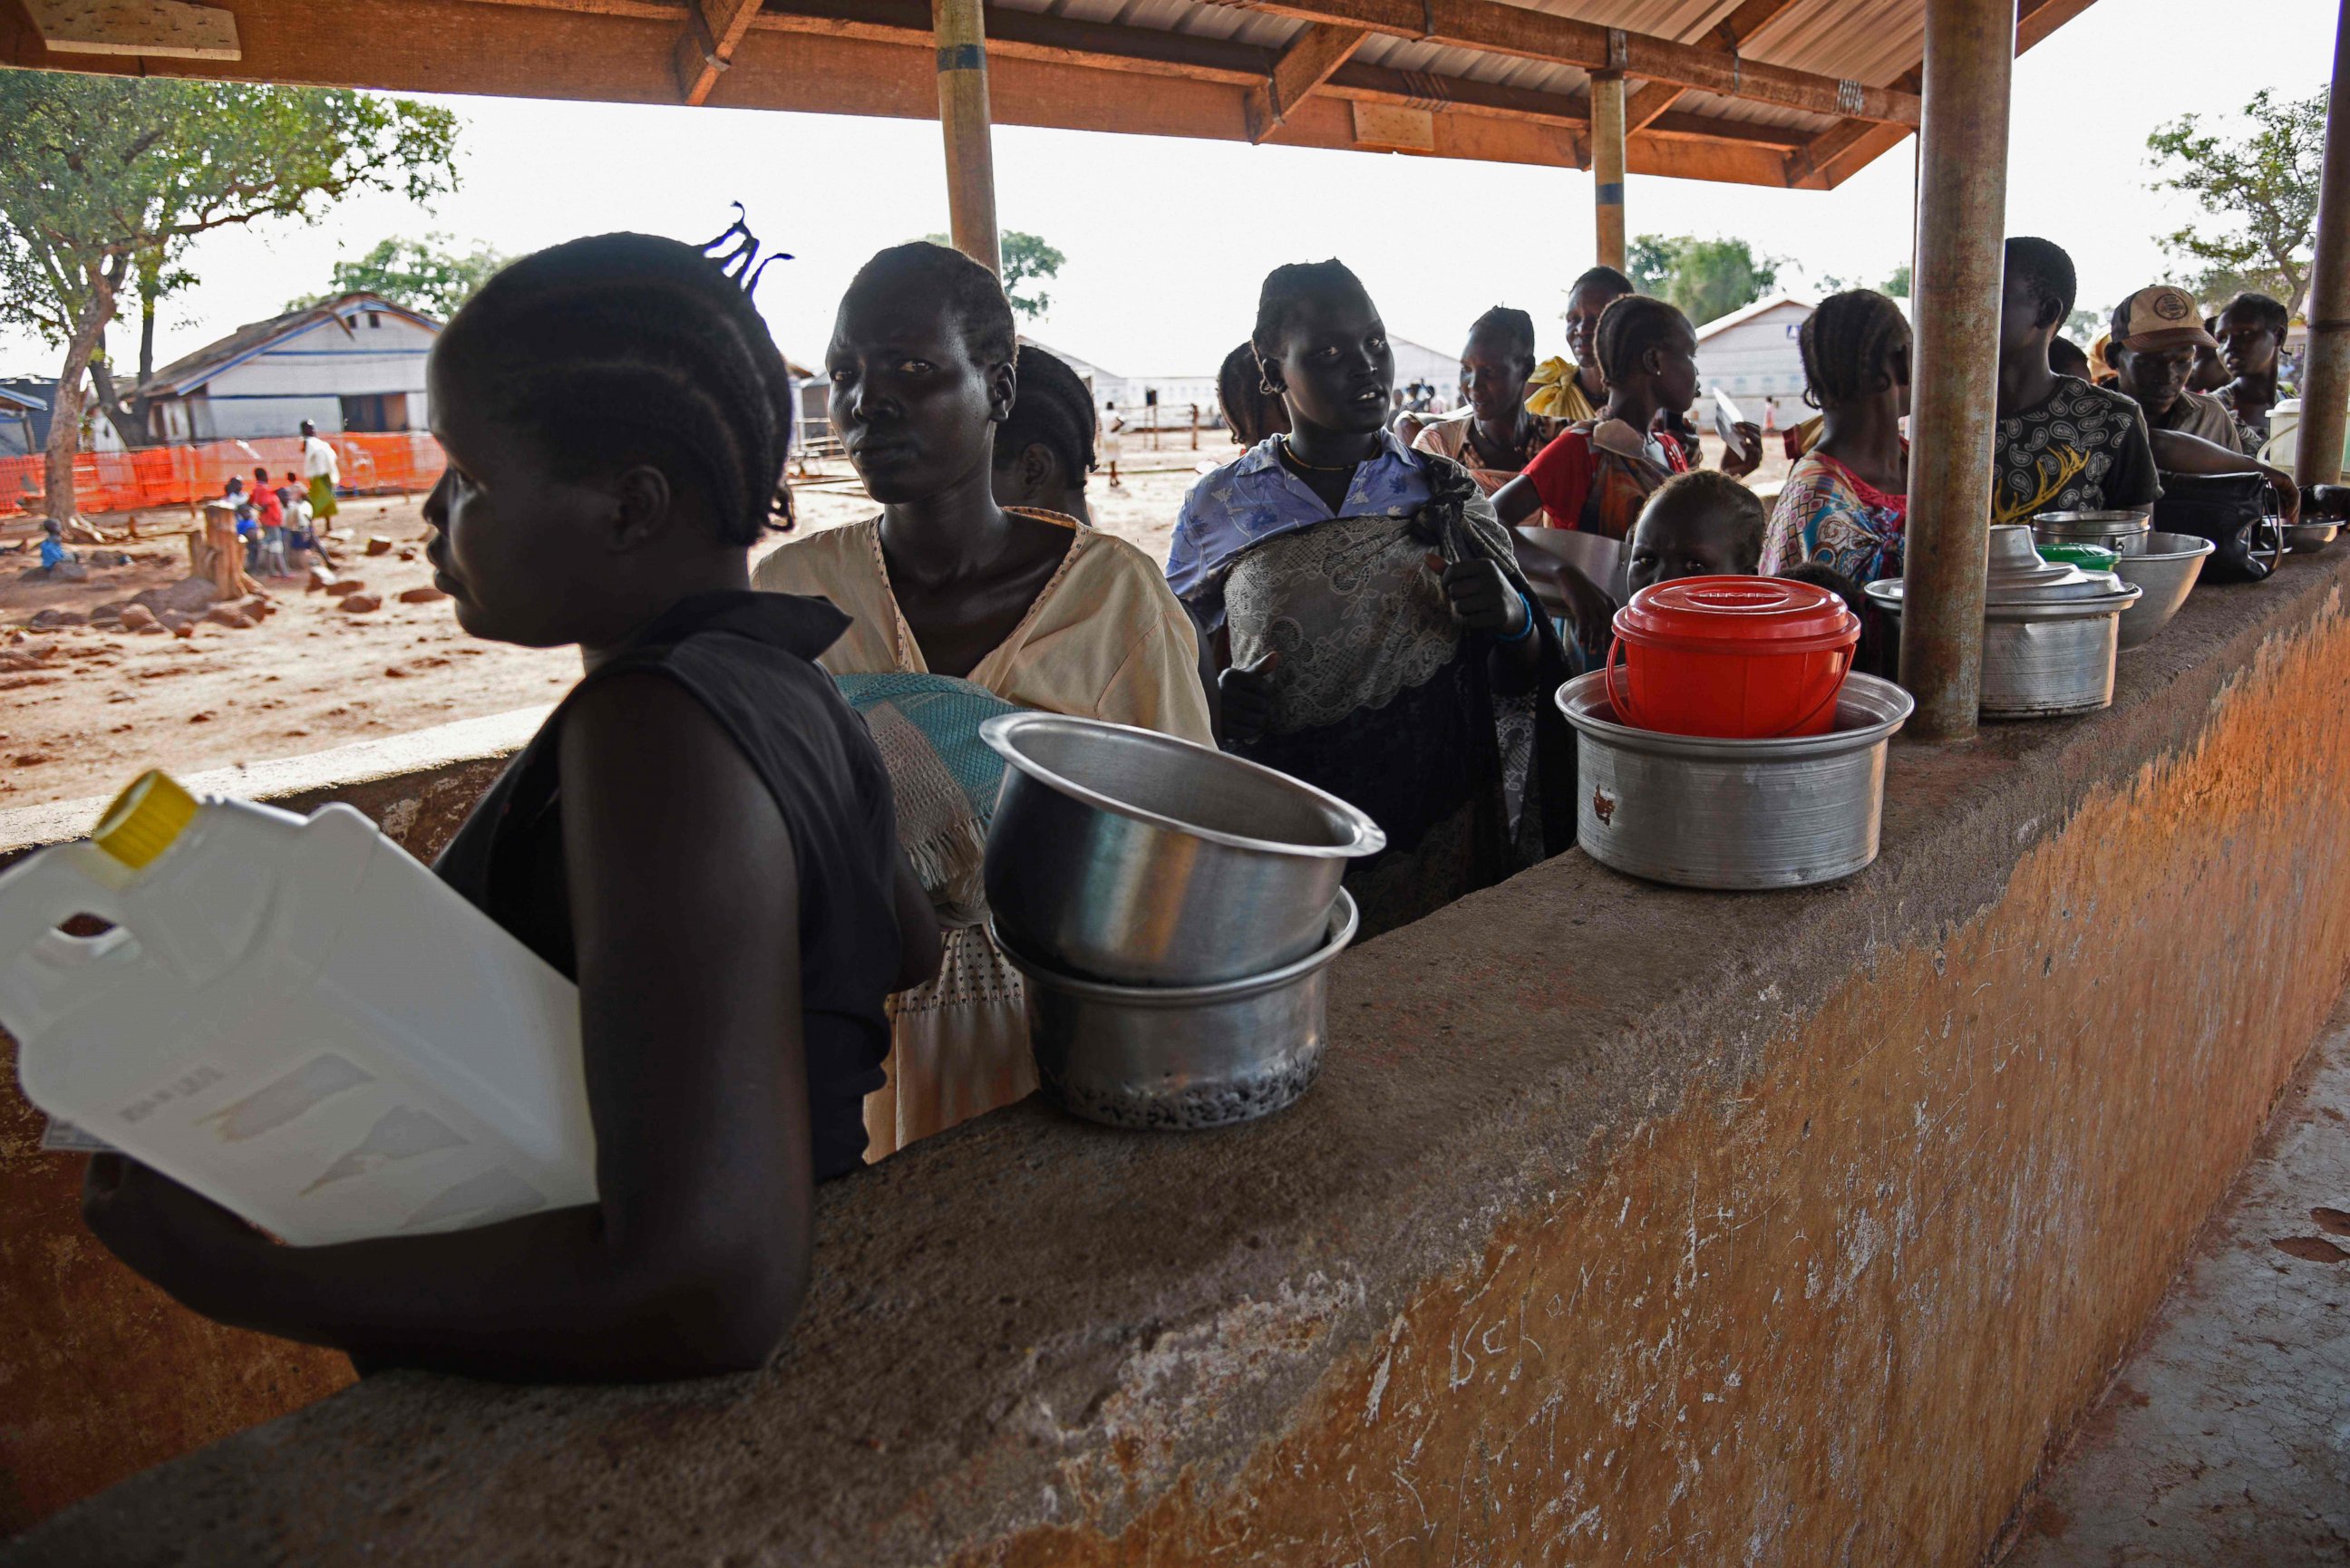 PHOTO: Newly arrived refugees from South Sudan queue to receive food at the Nyumanzi transit center in Adjumani, Uganda, on July 13, 2016.